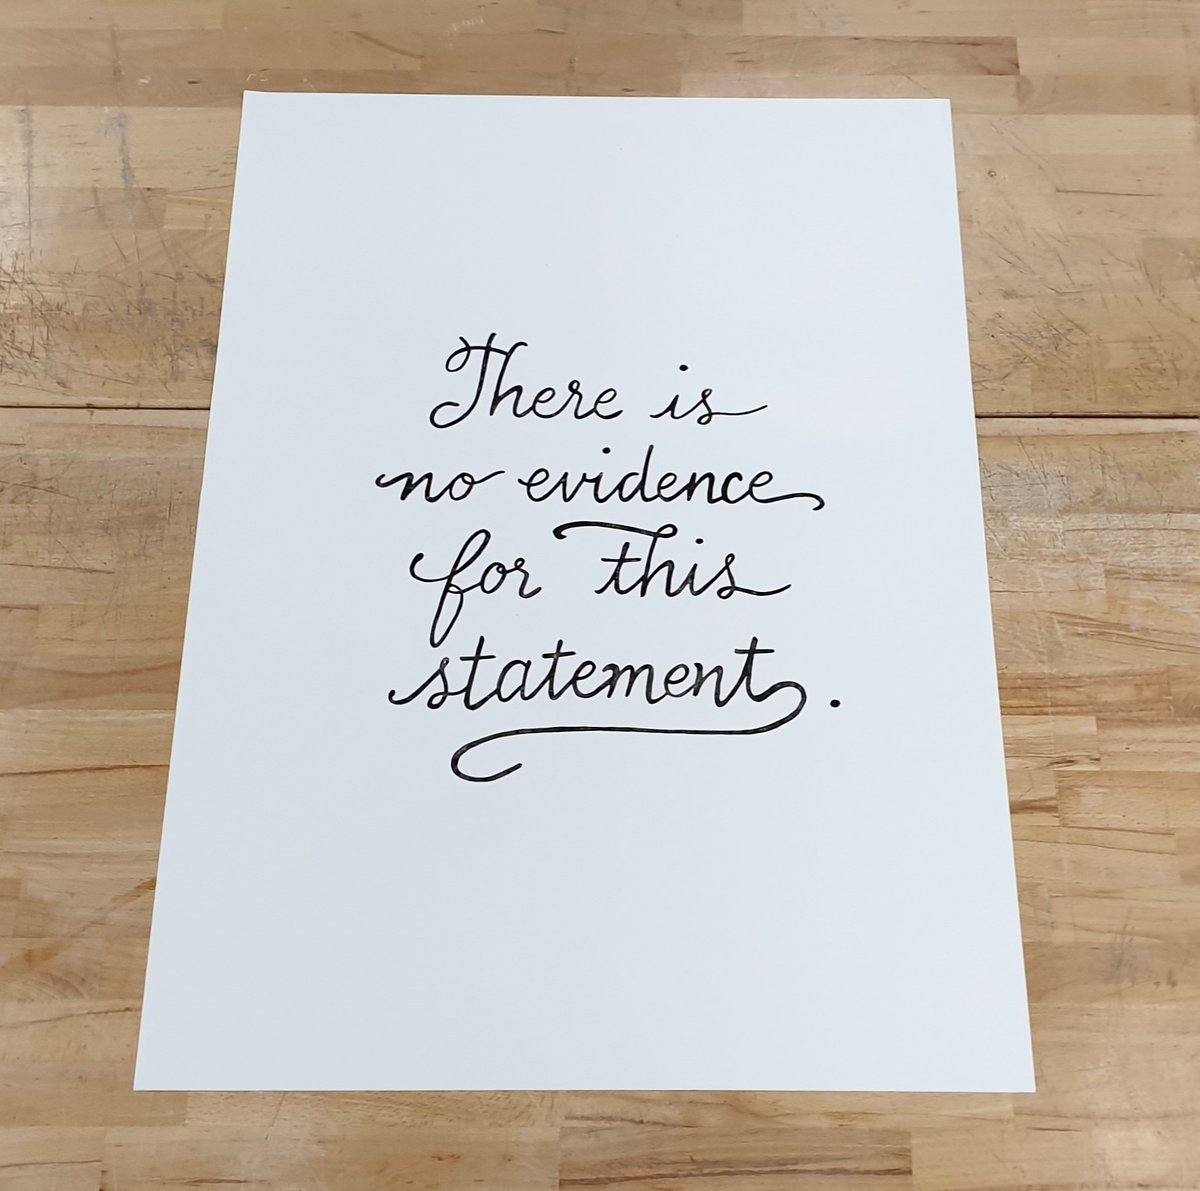 Burned Lines No. 7: 'There is no evidence for this statement.'
#BurnedLines is a series depicting extracts from #climatechange denier tweets and press written to or about me rewritten with ink made from the ashes of the #Australianbushfires using a cockatoo feather 

#art